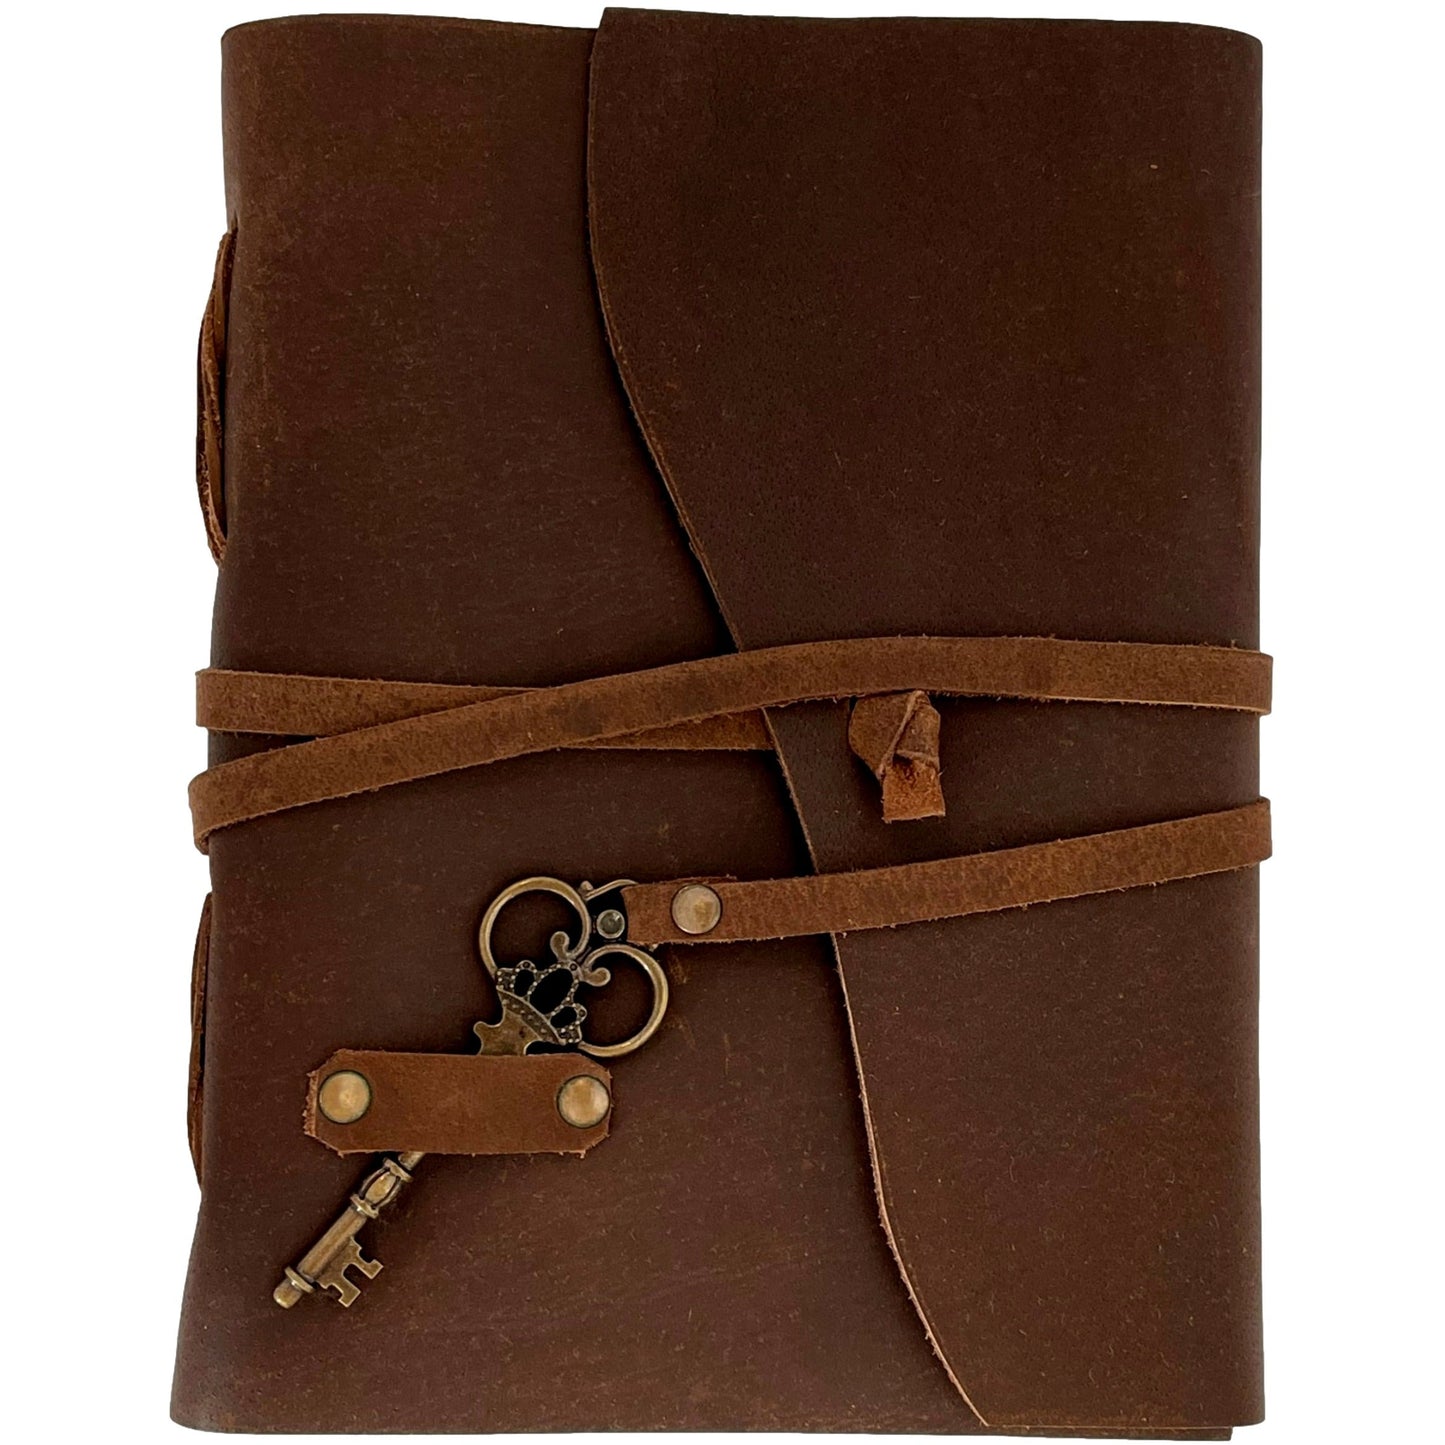 100% Leather Journal with Strap Closure and Heart Skeleton Key Decoration